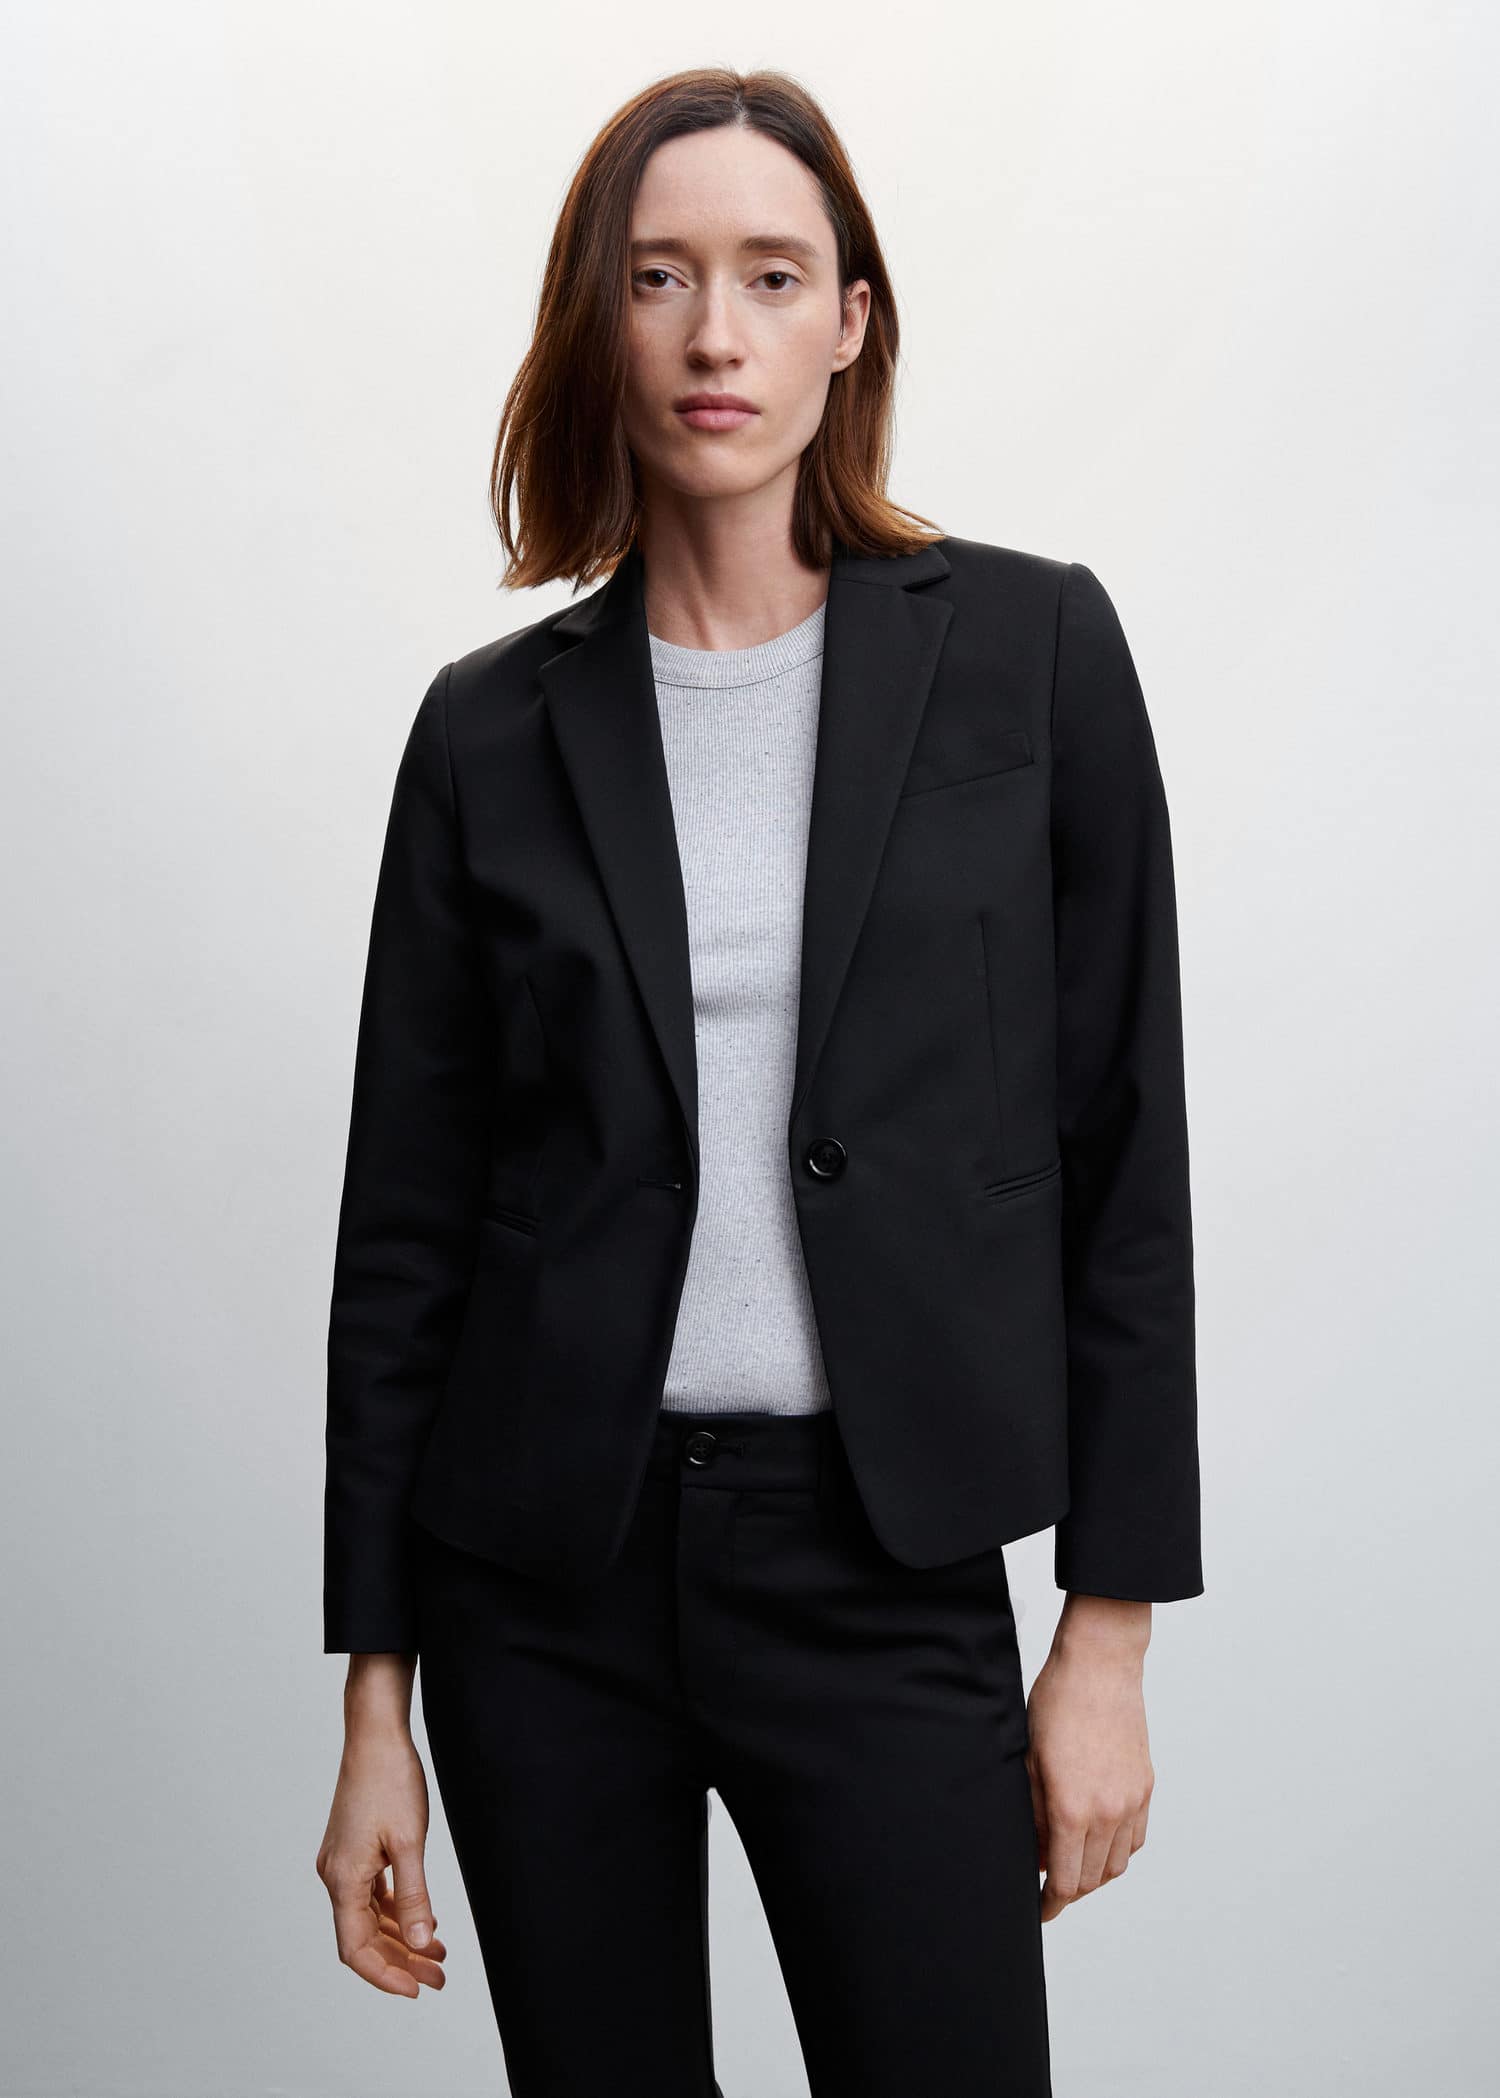 Fitted suit jacket with pocket  - Medium plane